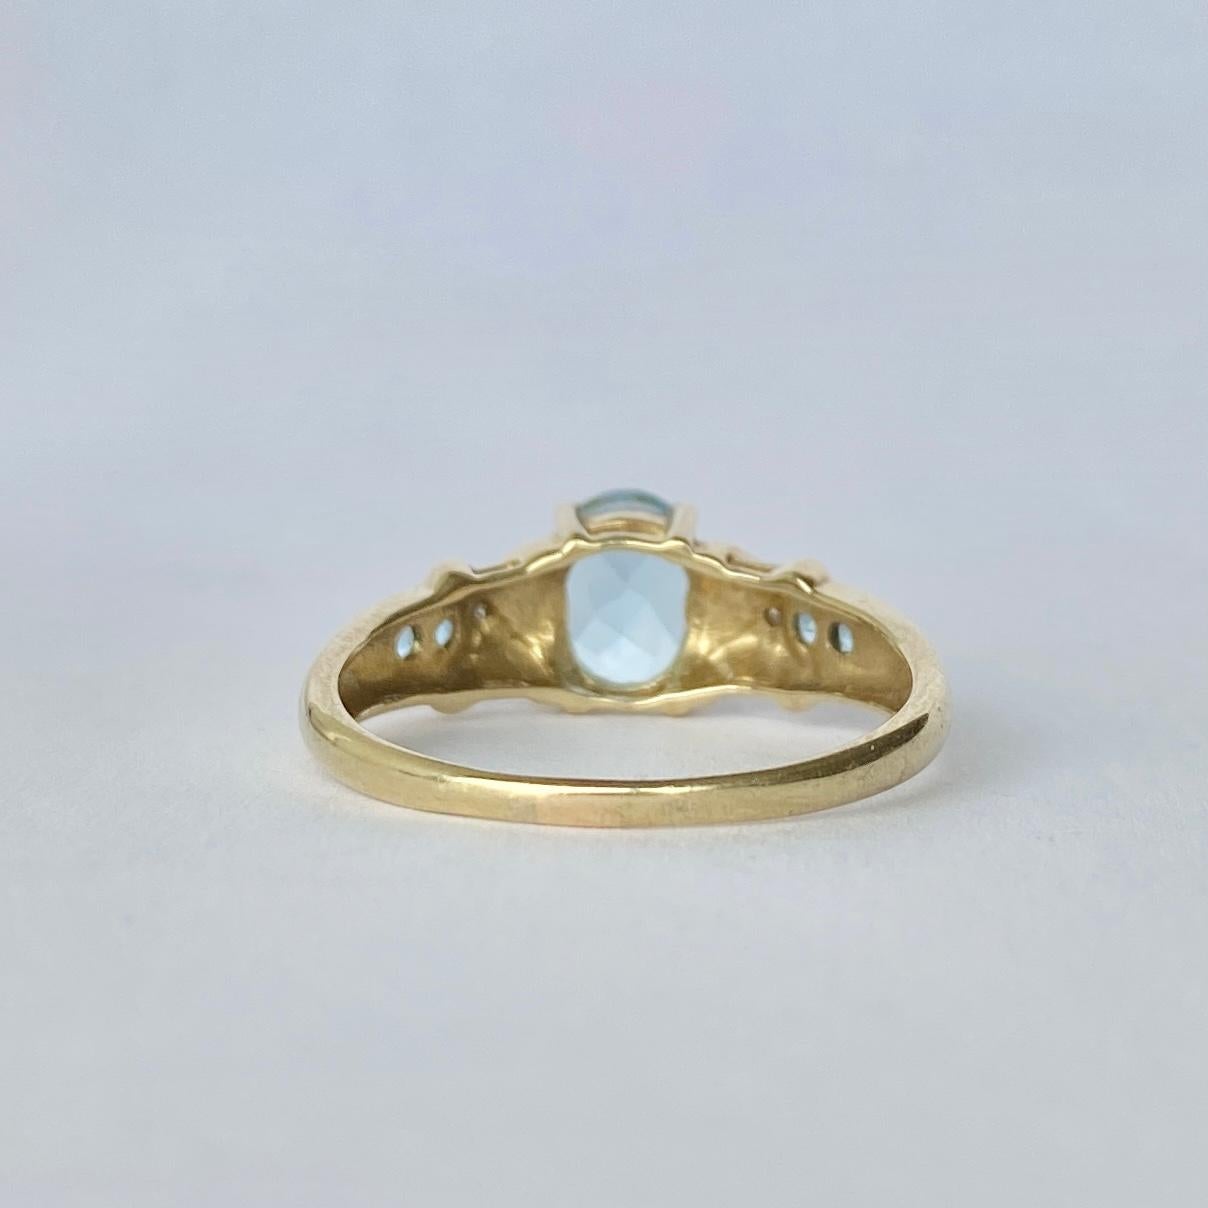 This stunning ring holds a gorgeous pale blue aqua at the centre measuring 1carat and the shoulders also hold two round aquamarine stones each totalling 10pts per shoulder. Either side of the central stone there are two 'kisses' that hold a diamond